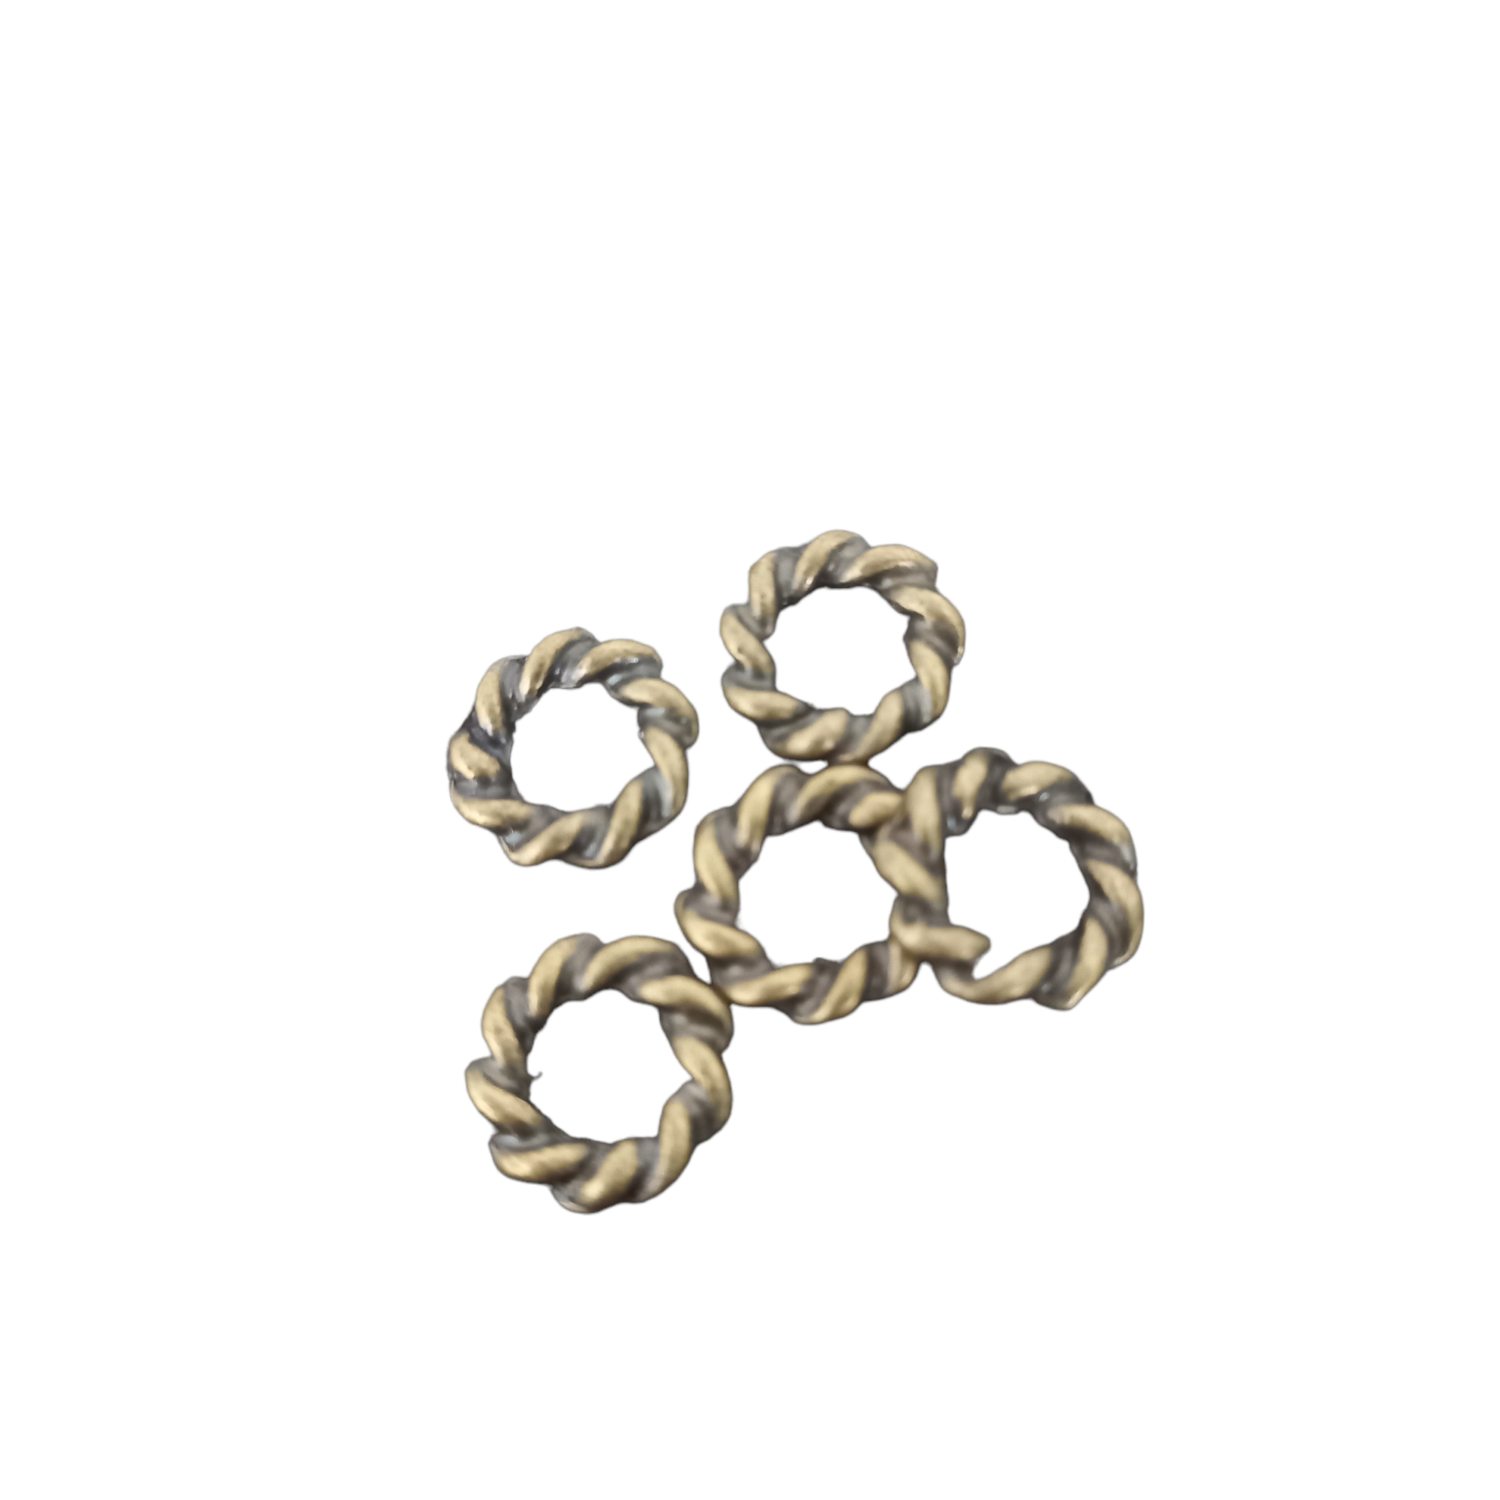 Solid Rings Antique Gold 10mm